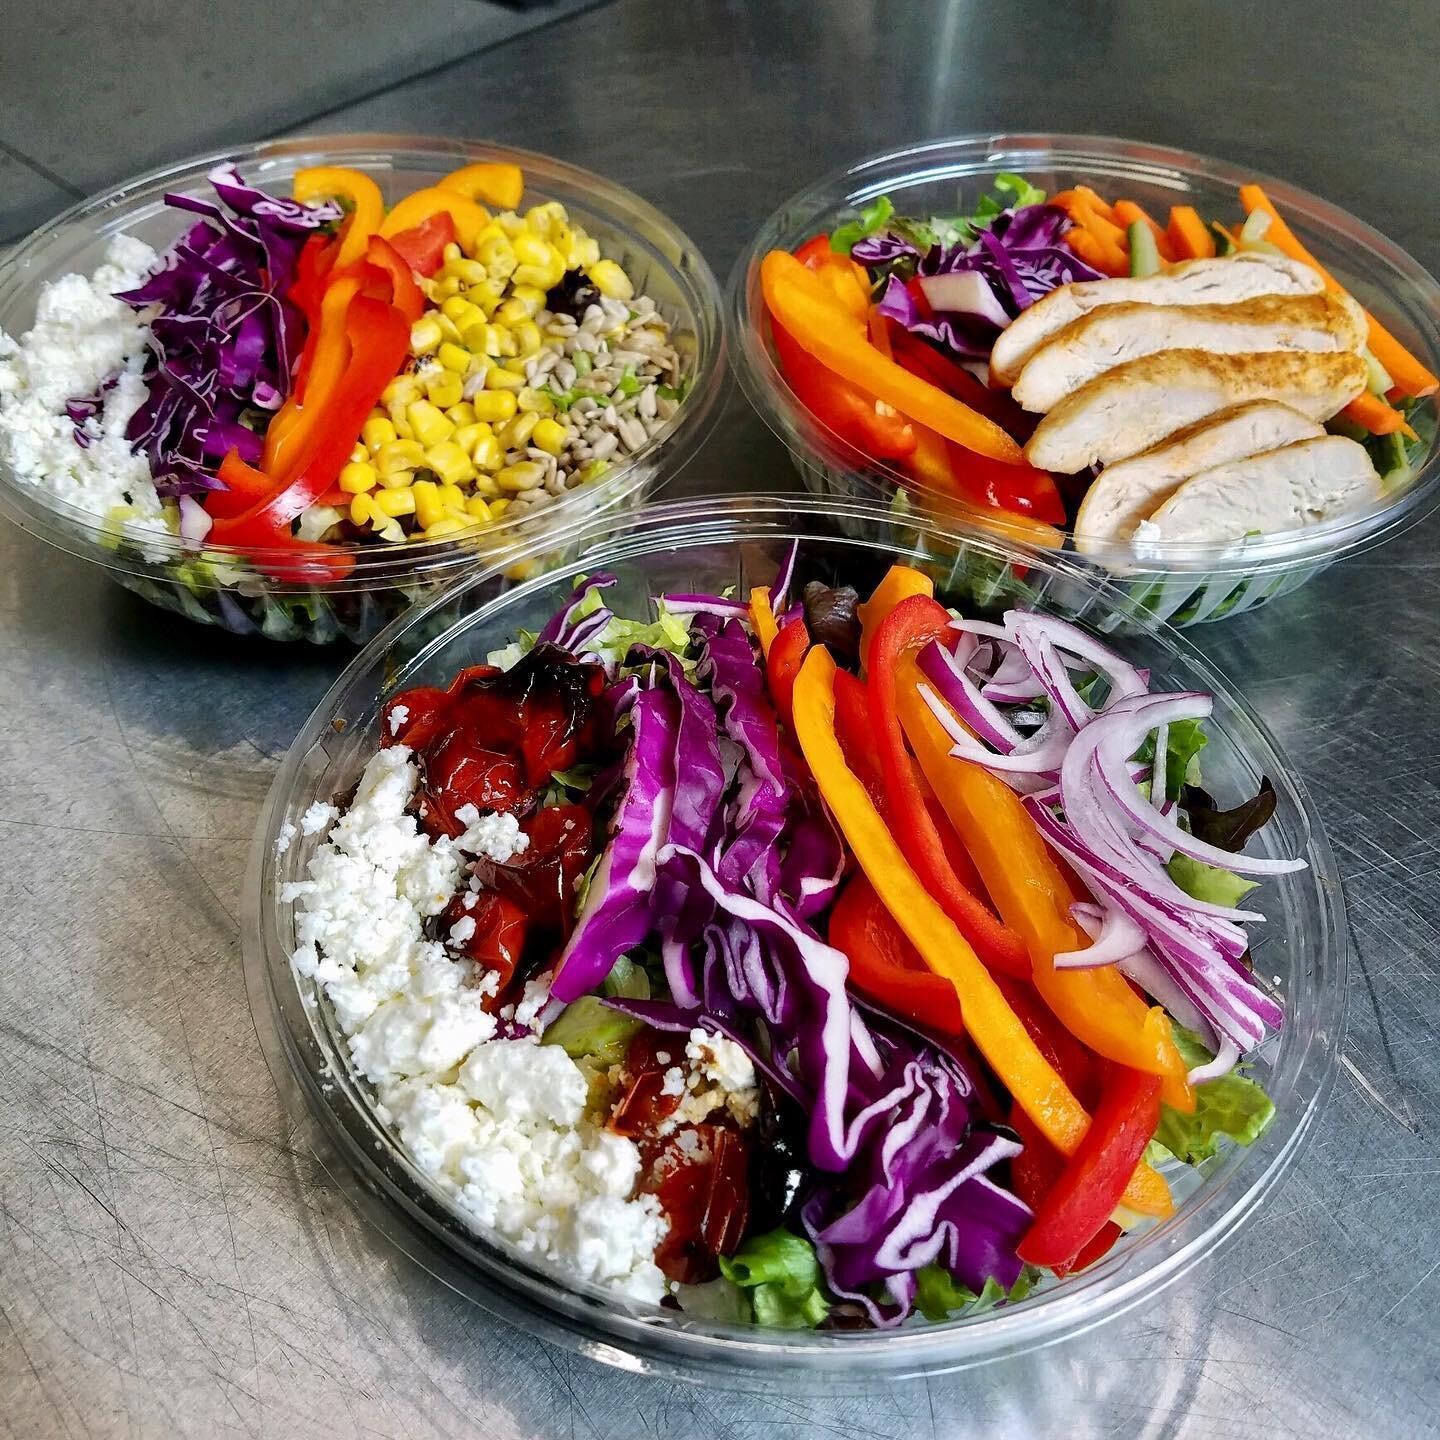 Lots of colorful new options with our new BYO Greens Bowls on Kinetic Prepped! Make sure to add all these beautiful veggies to your order before they lock this Sunday! (link in bio)